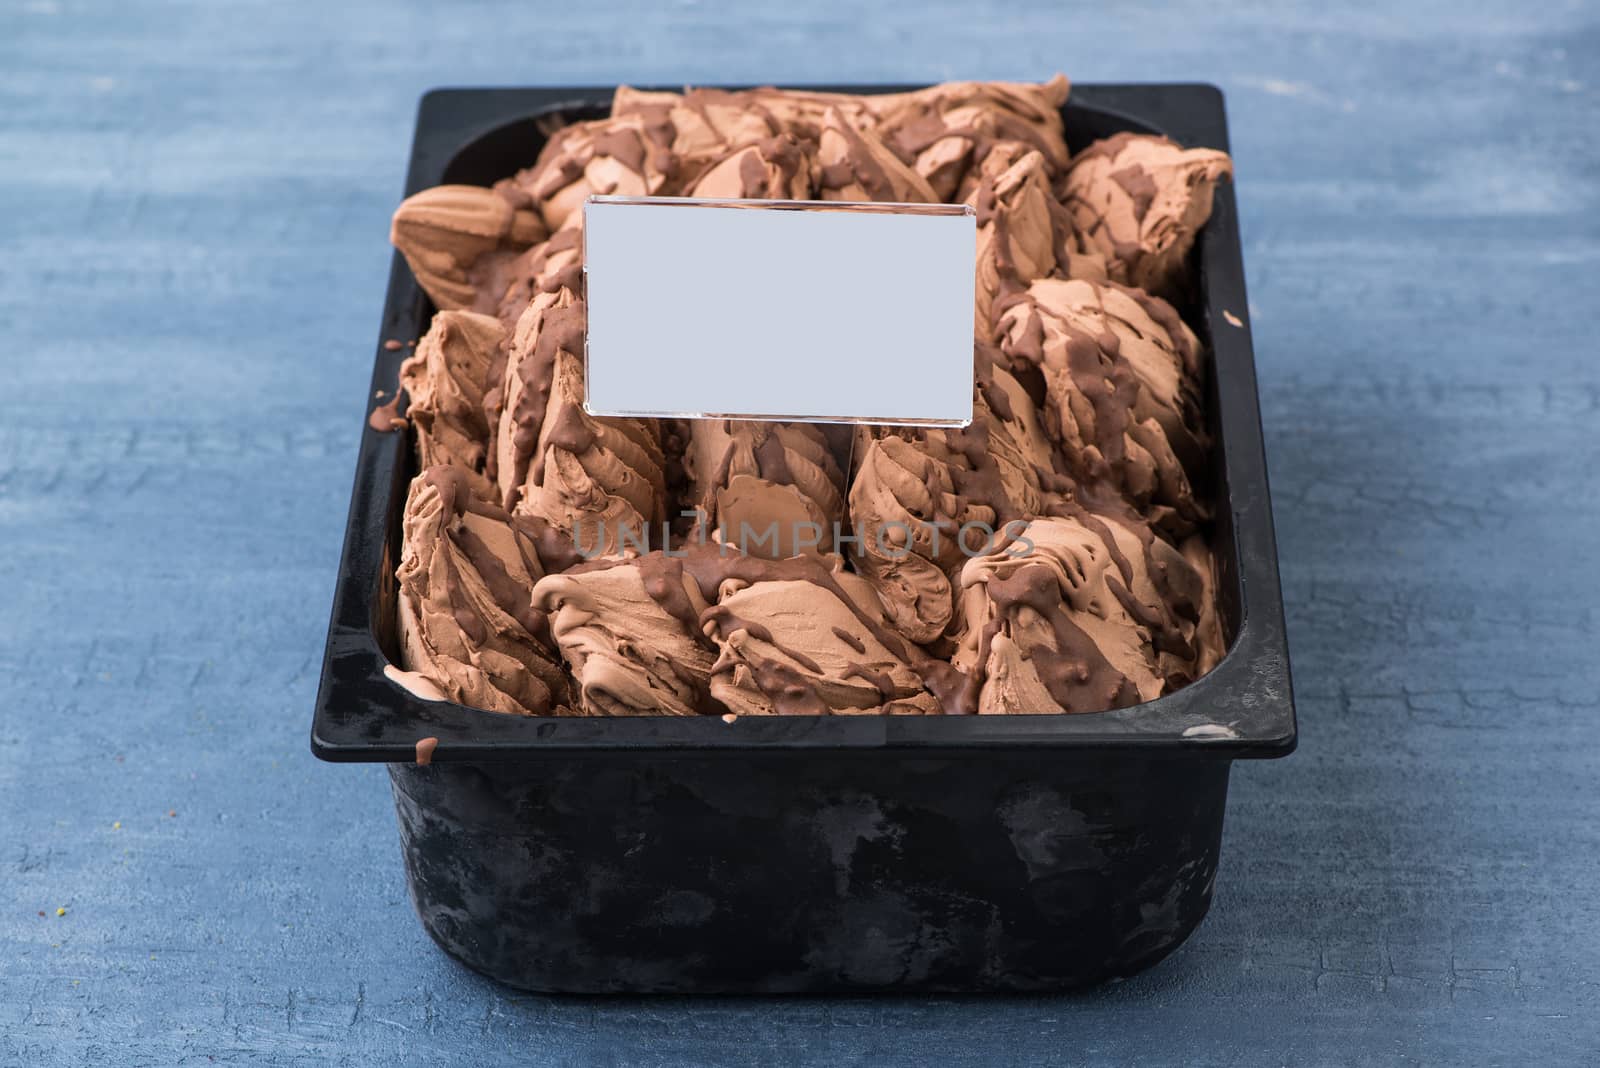 appetizing ice cream in a plastic container with a price tag on a decorative blue background